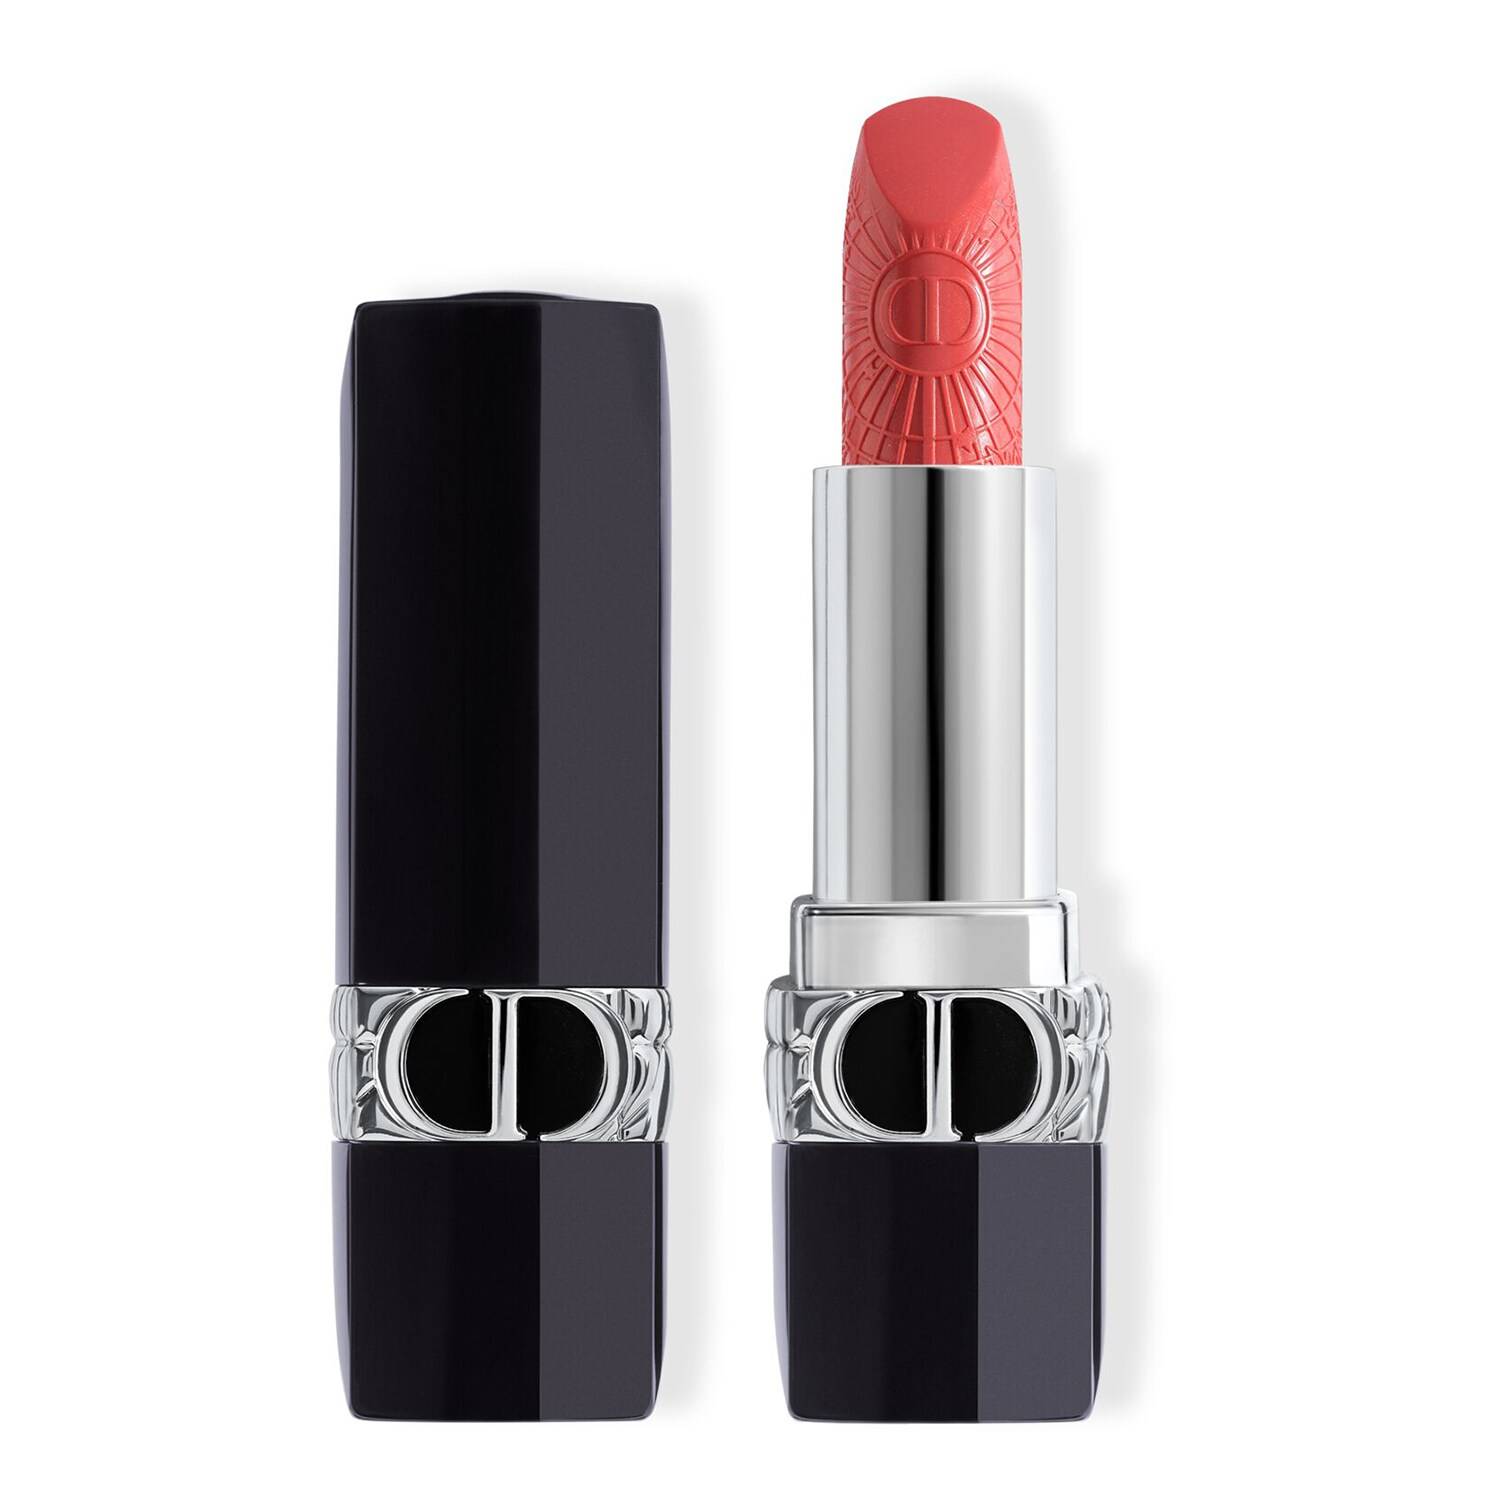 Dior Rouge Dior - Refillable Lipstick - Couture Finish - Limited Edition Rouge Dior Satin 471